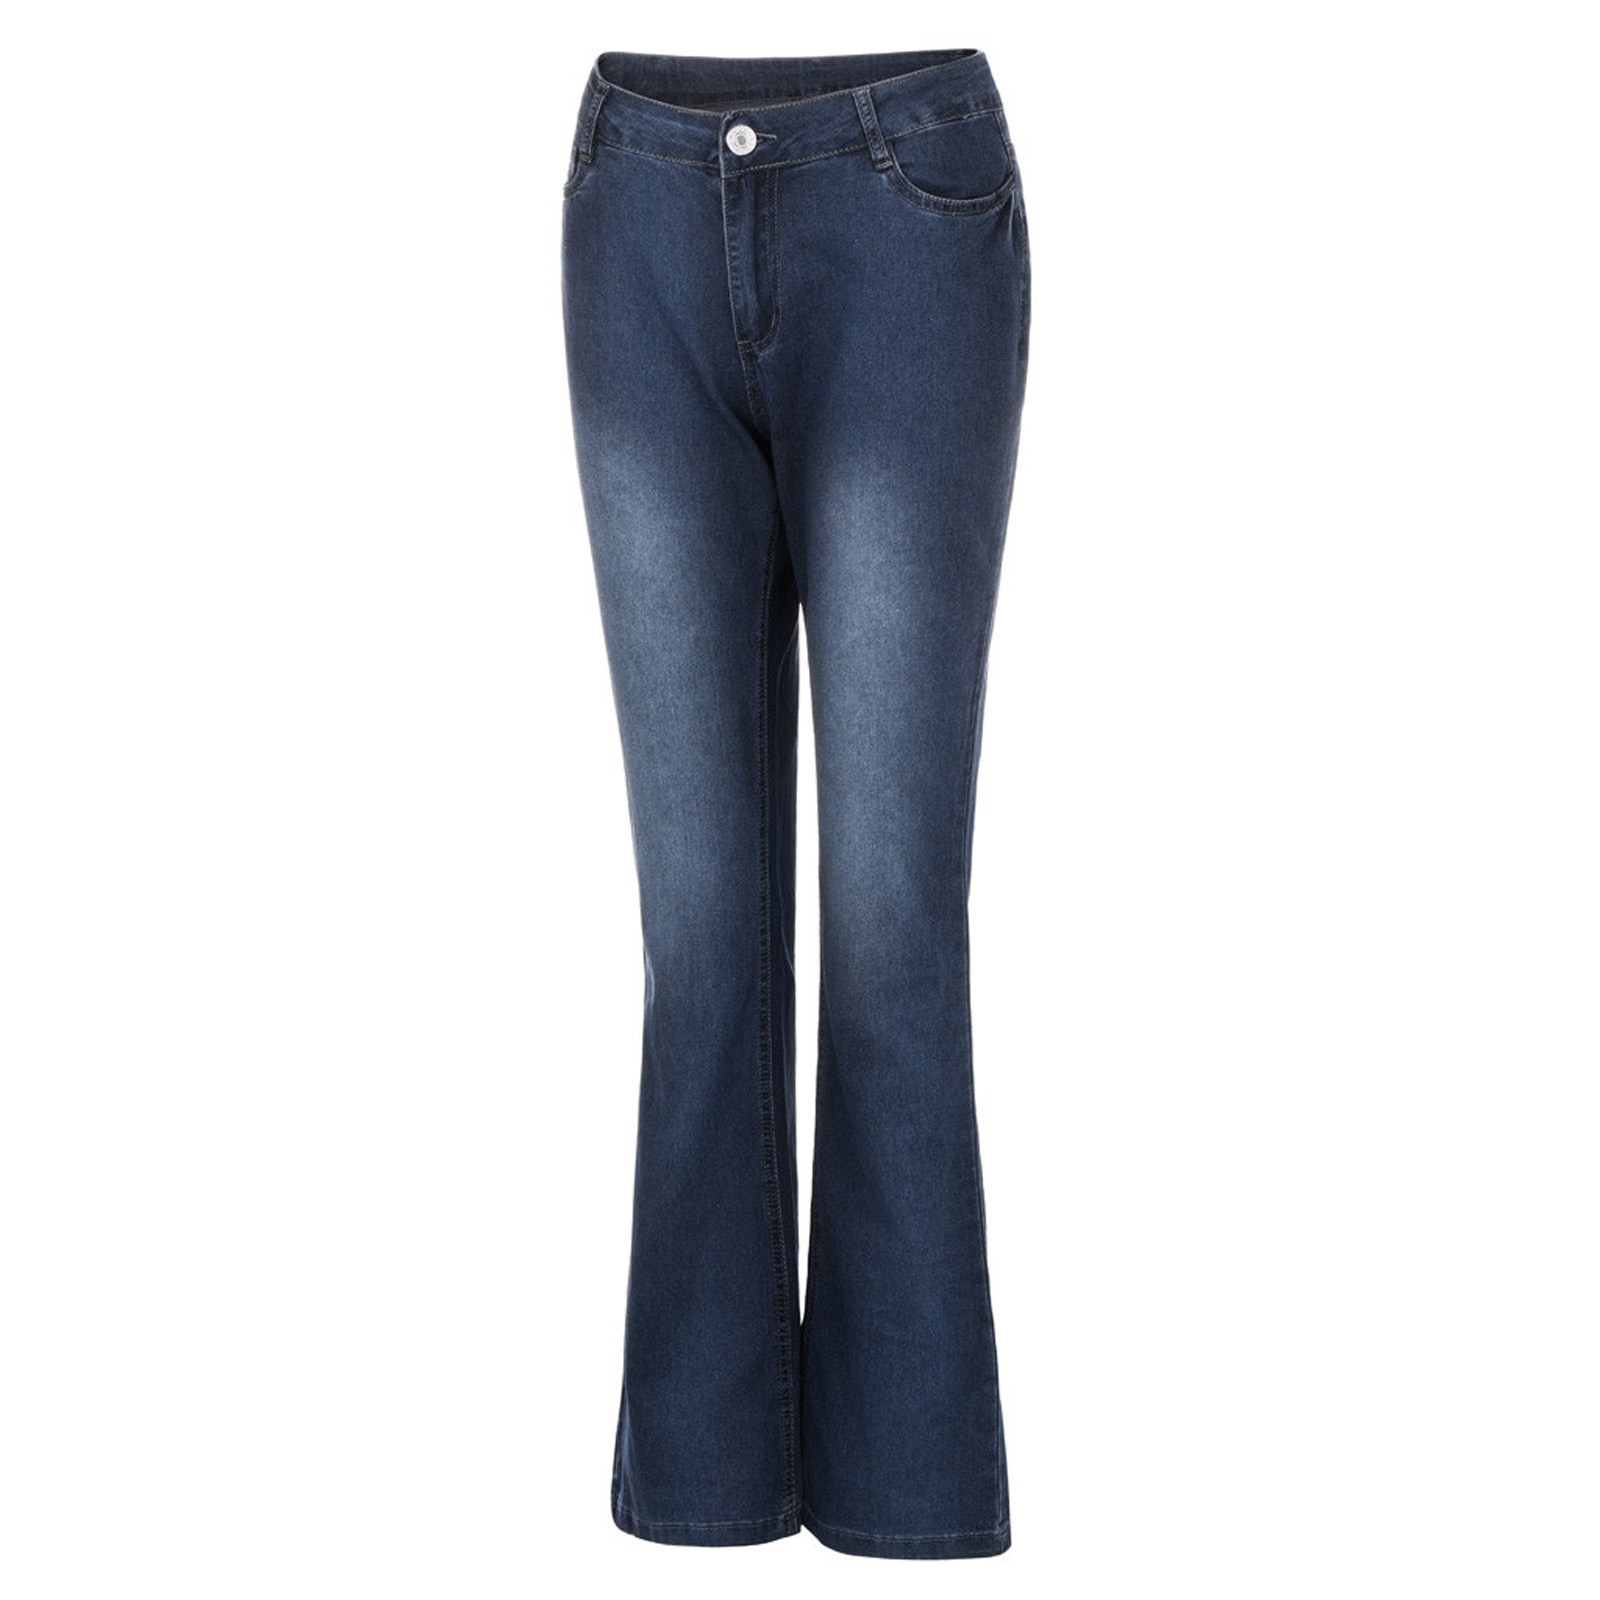 Giftesty Womens Pants Clearance Women Mid Waisted Denim Jeans ...